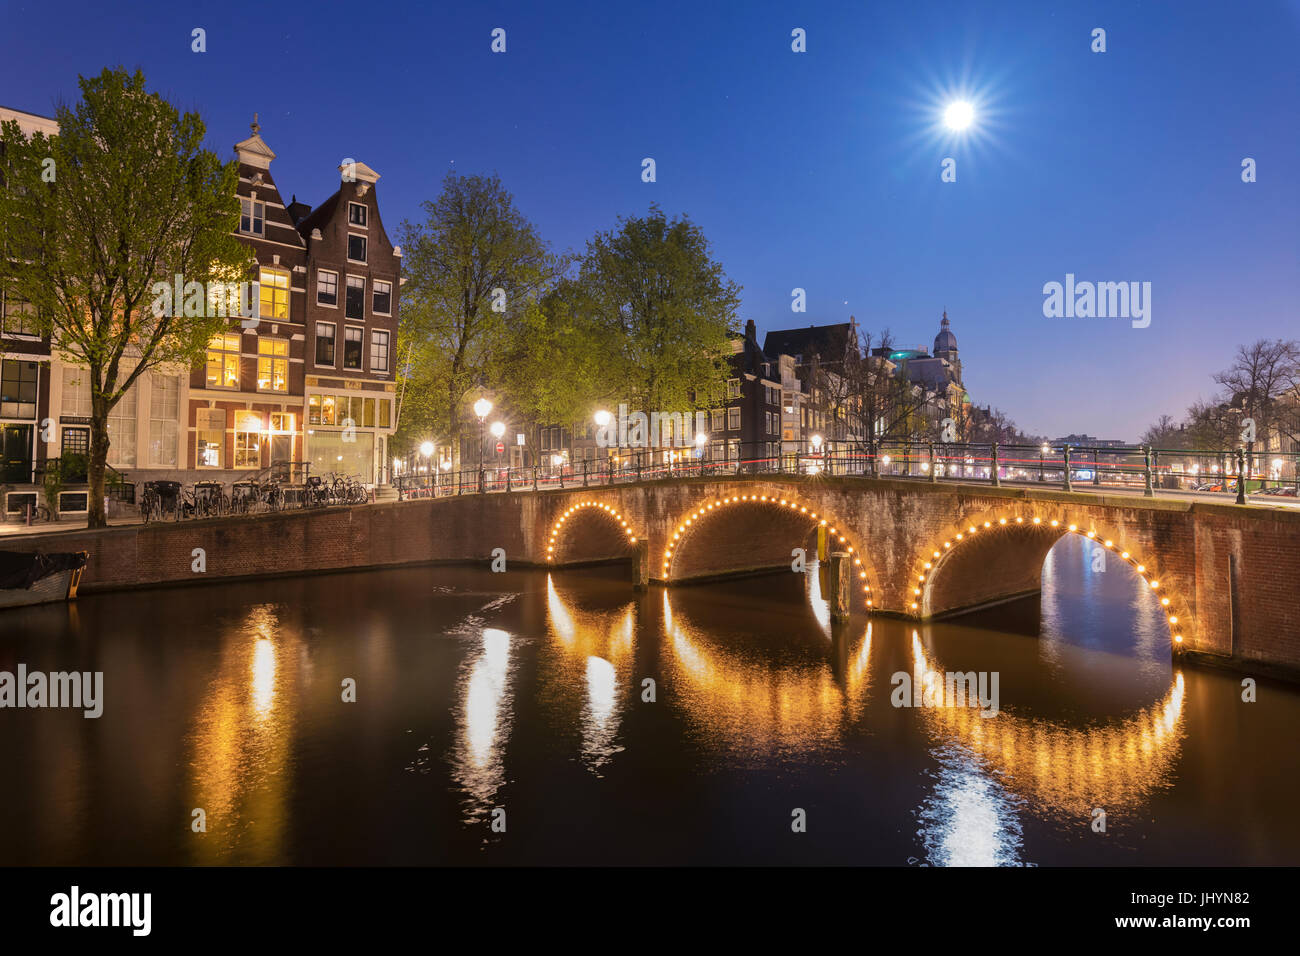 Dusk light on typical buildings and bridges reflected in a typical canal, Amsterdam, Holland (The Netherlands), Europe Stock Photo